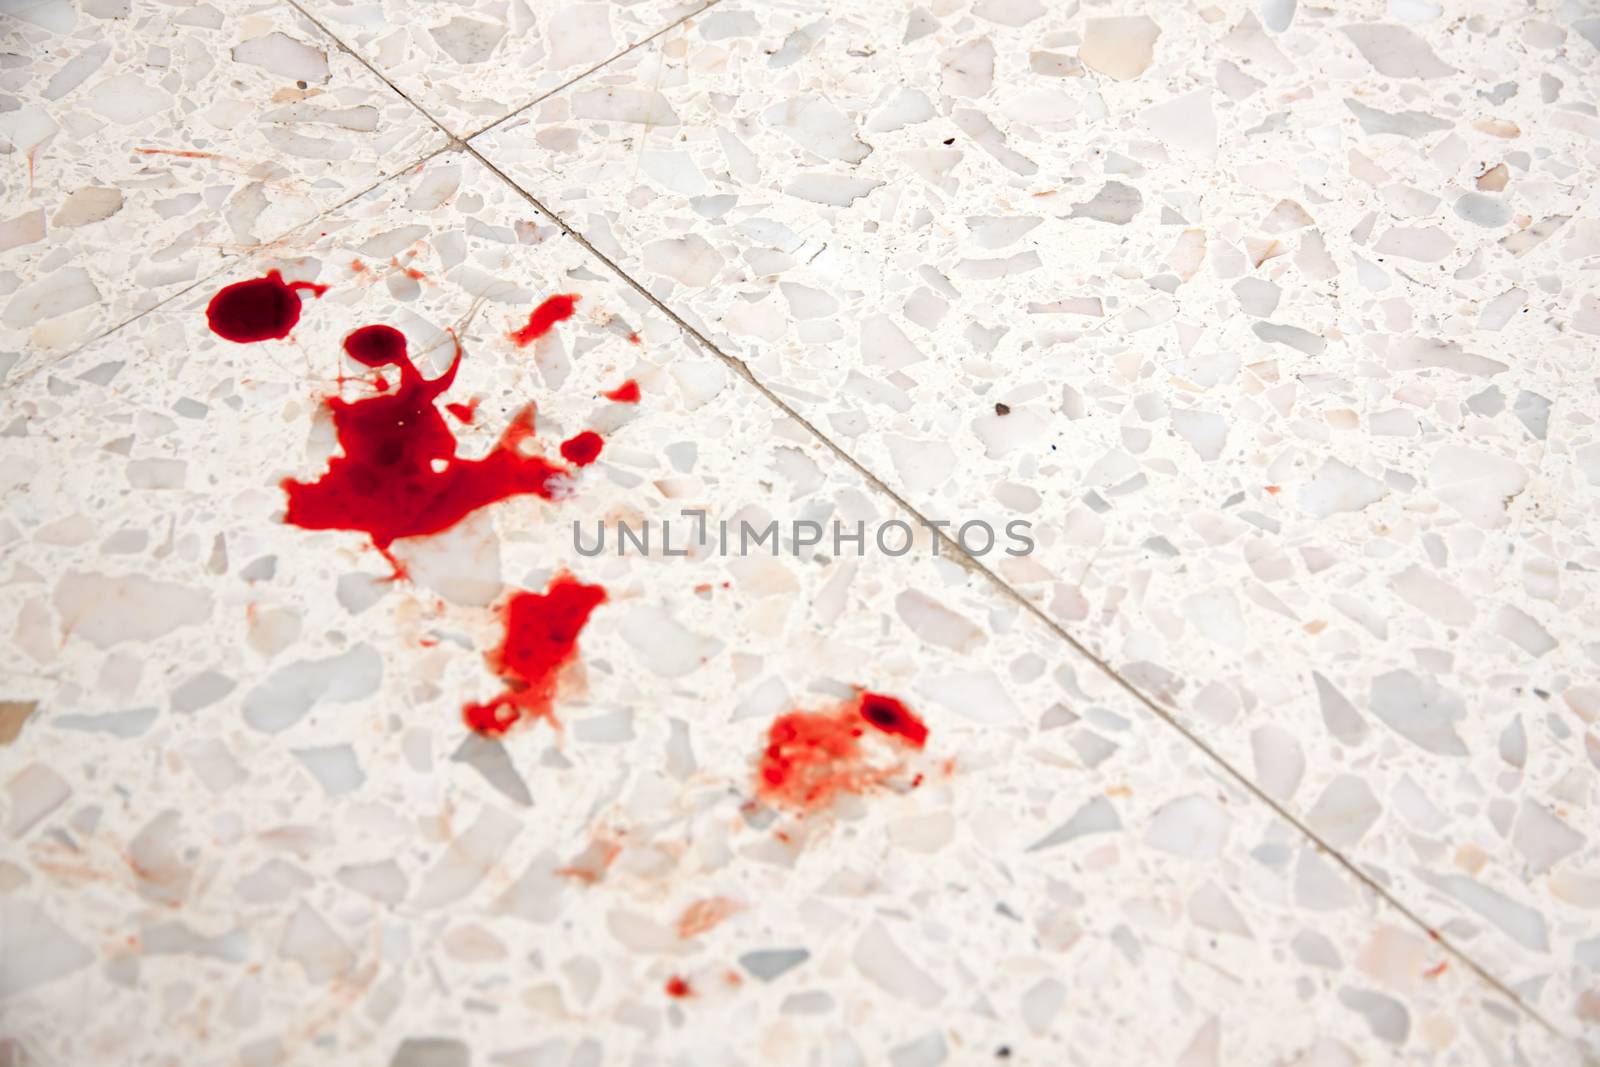 blood on the floor as symbol of crime and violence.